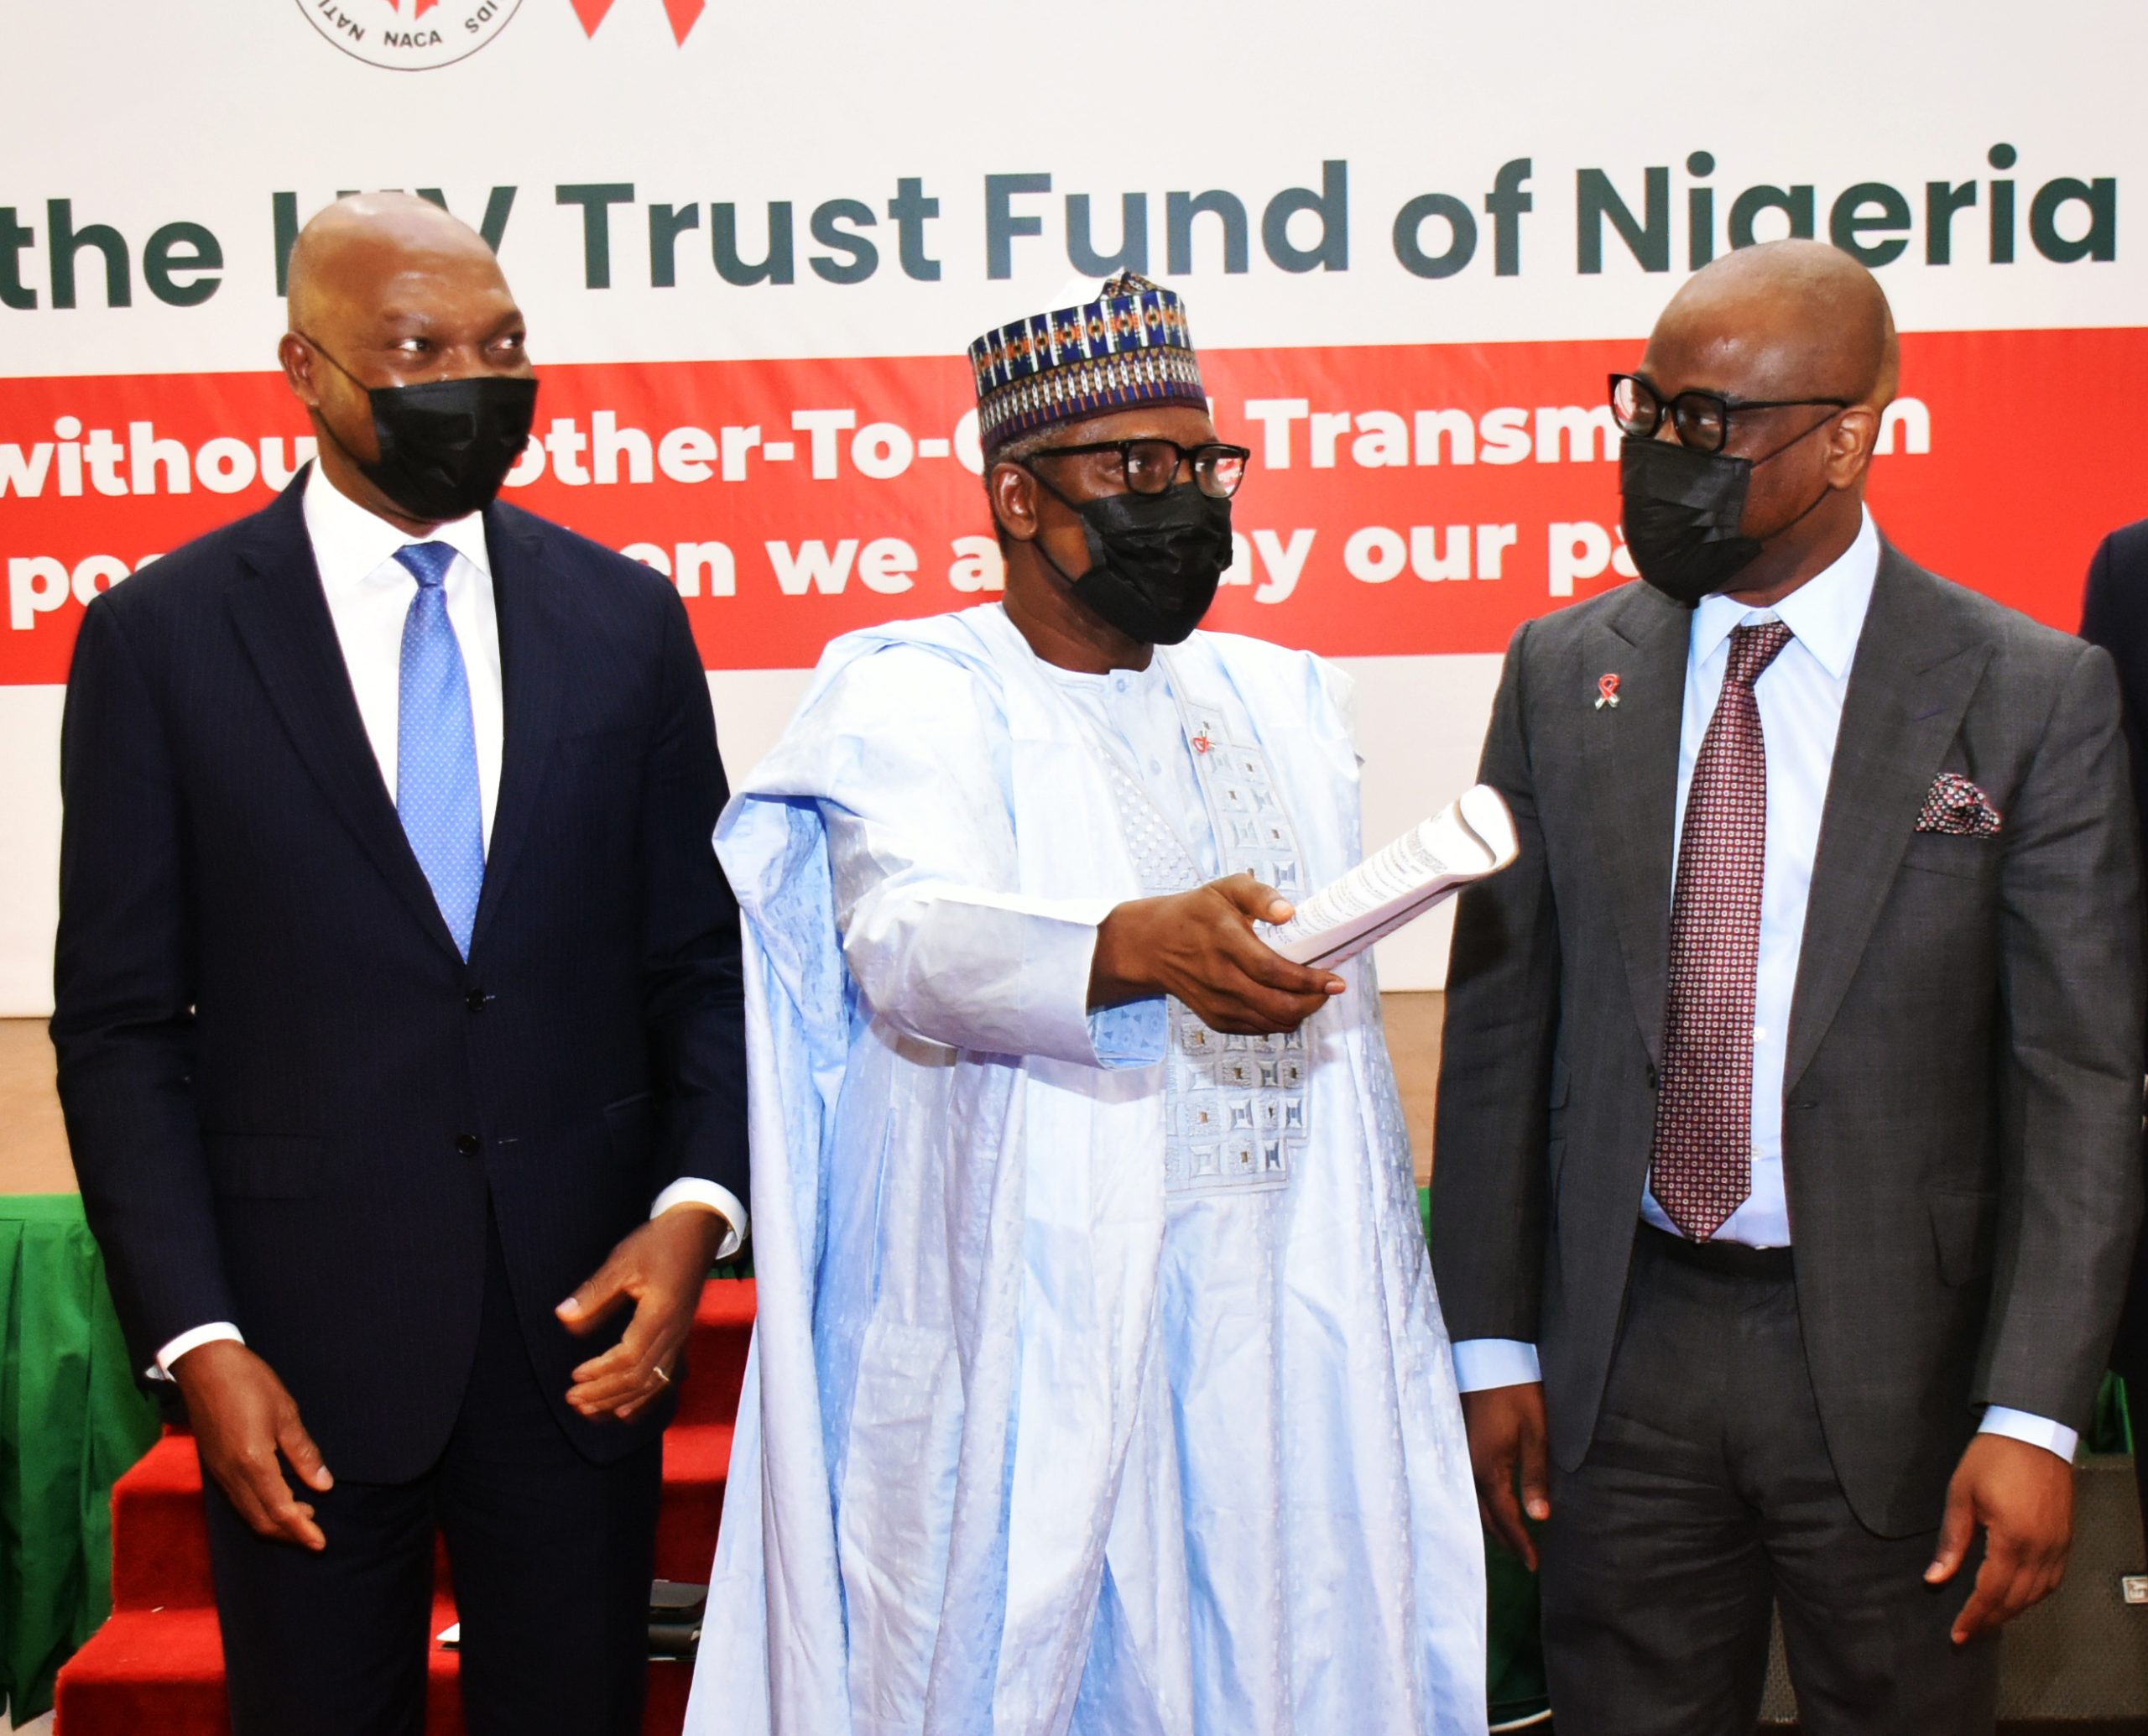 PIC 2 From left: Chairman, Shell Group of Companies in Nigeria, Mr Osagie Okunbor; Chairman, Dangote Group of Companies, Alhaji Aliko Dangote; CEO Access Bank Plc, Dr Herbert Wigwe, during the launch of the HIV Trust Fund of Nigeria at the Presidential Villa in Abuja on Tuesday (1/2/2022)
/1/2/2022/Callistus Ewelike/NAN